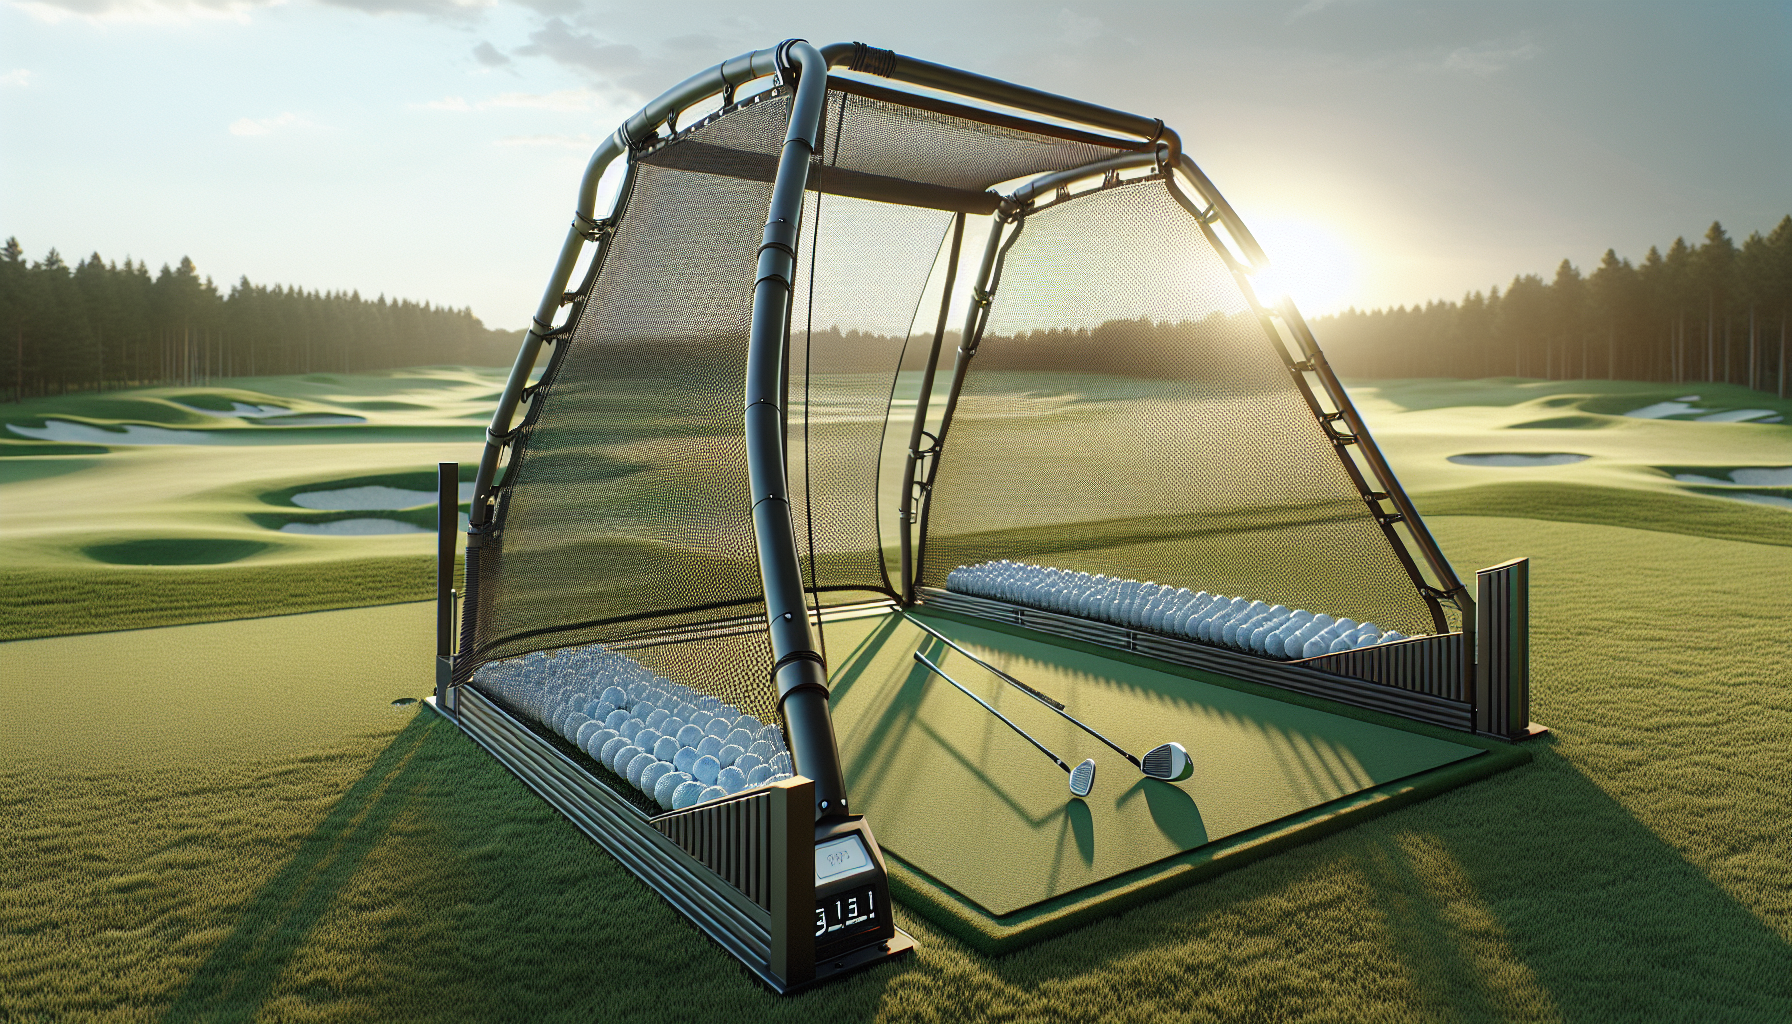 Golf net with side barriers and automatic ball return system